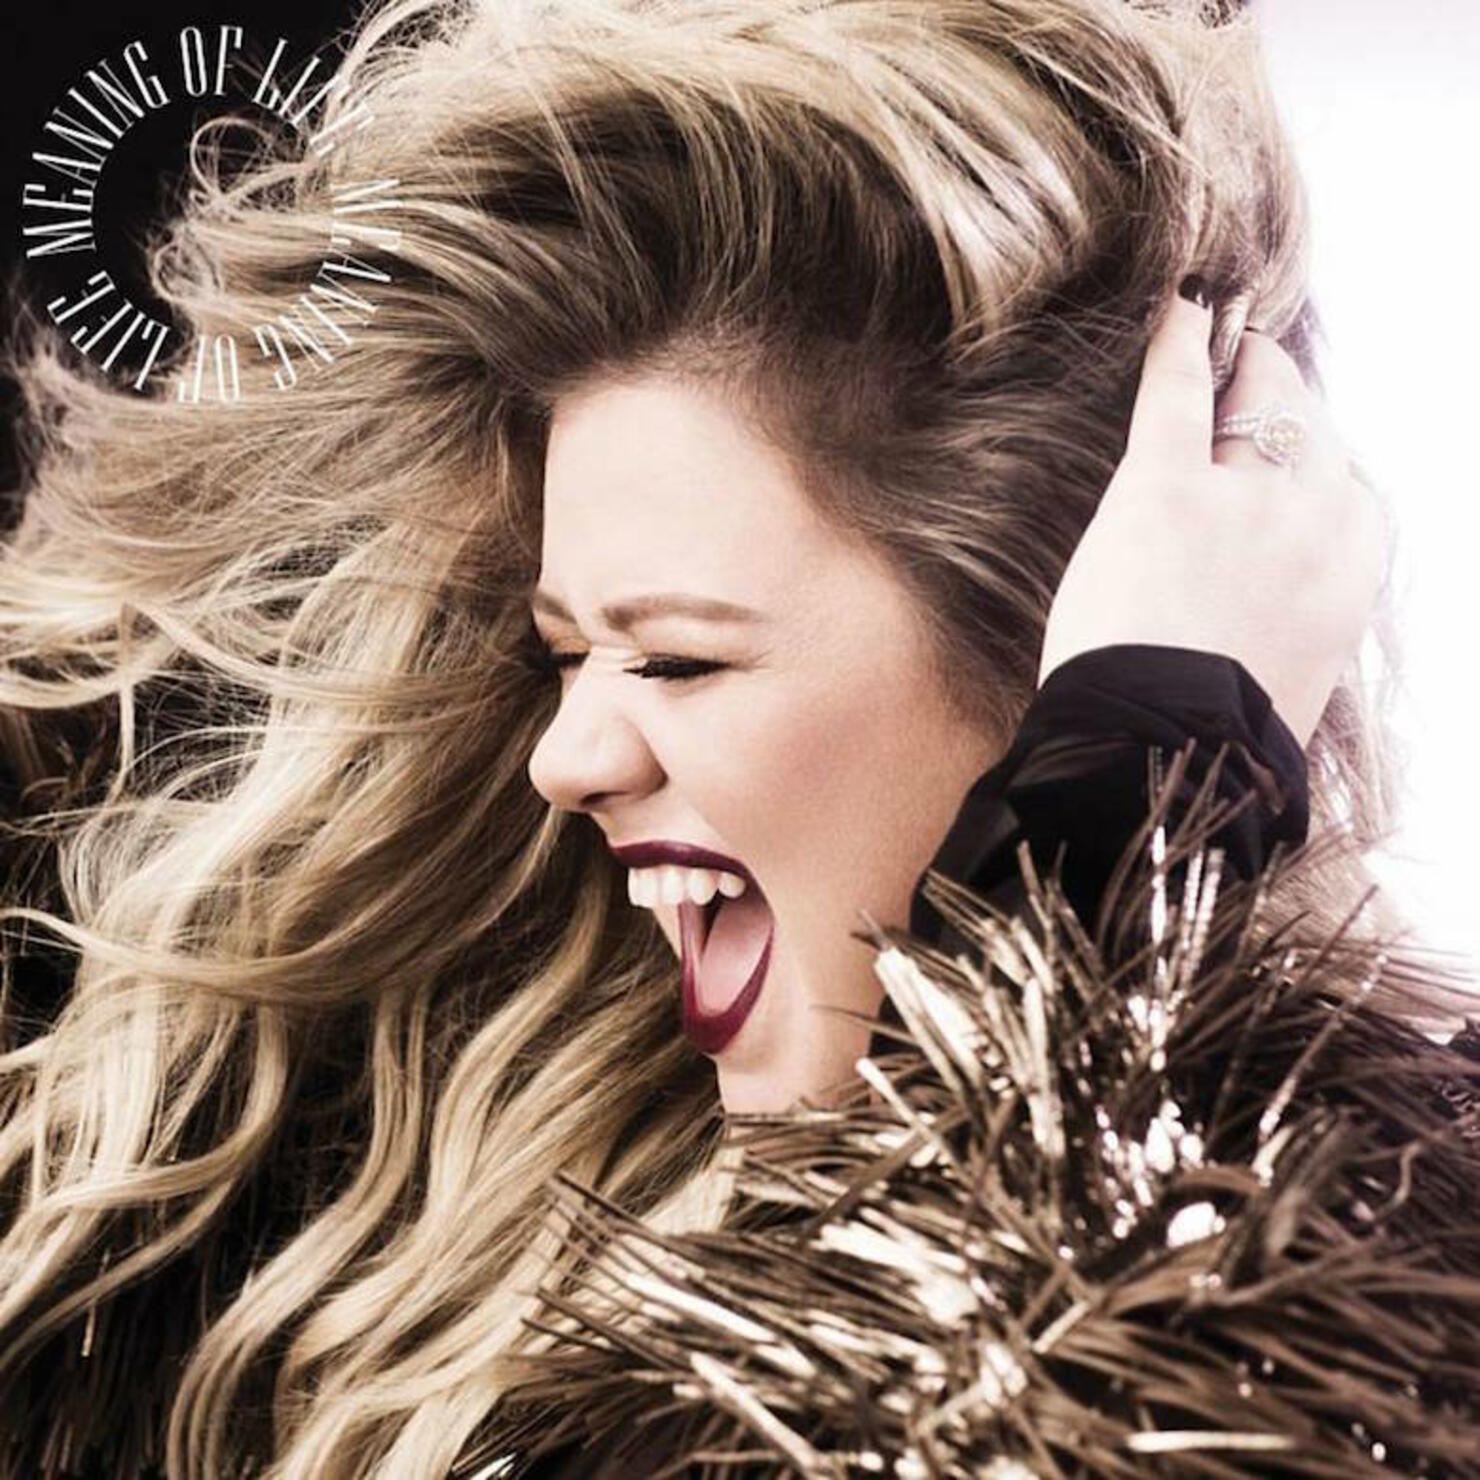 Kelly Clarkson - 'Meaning of Life'